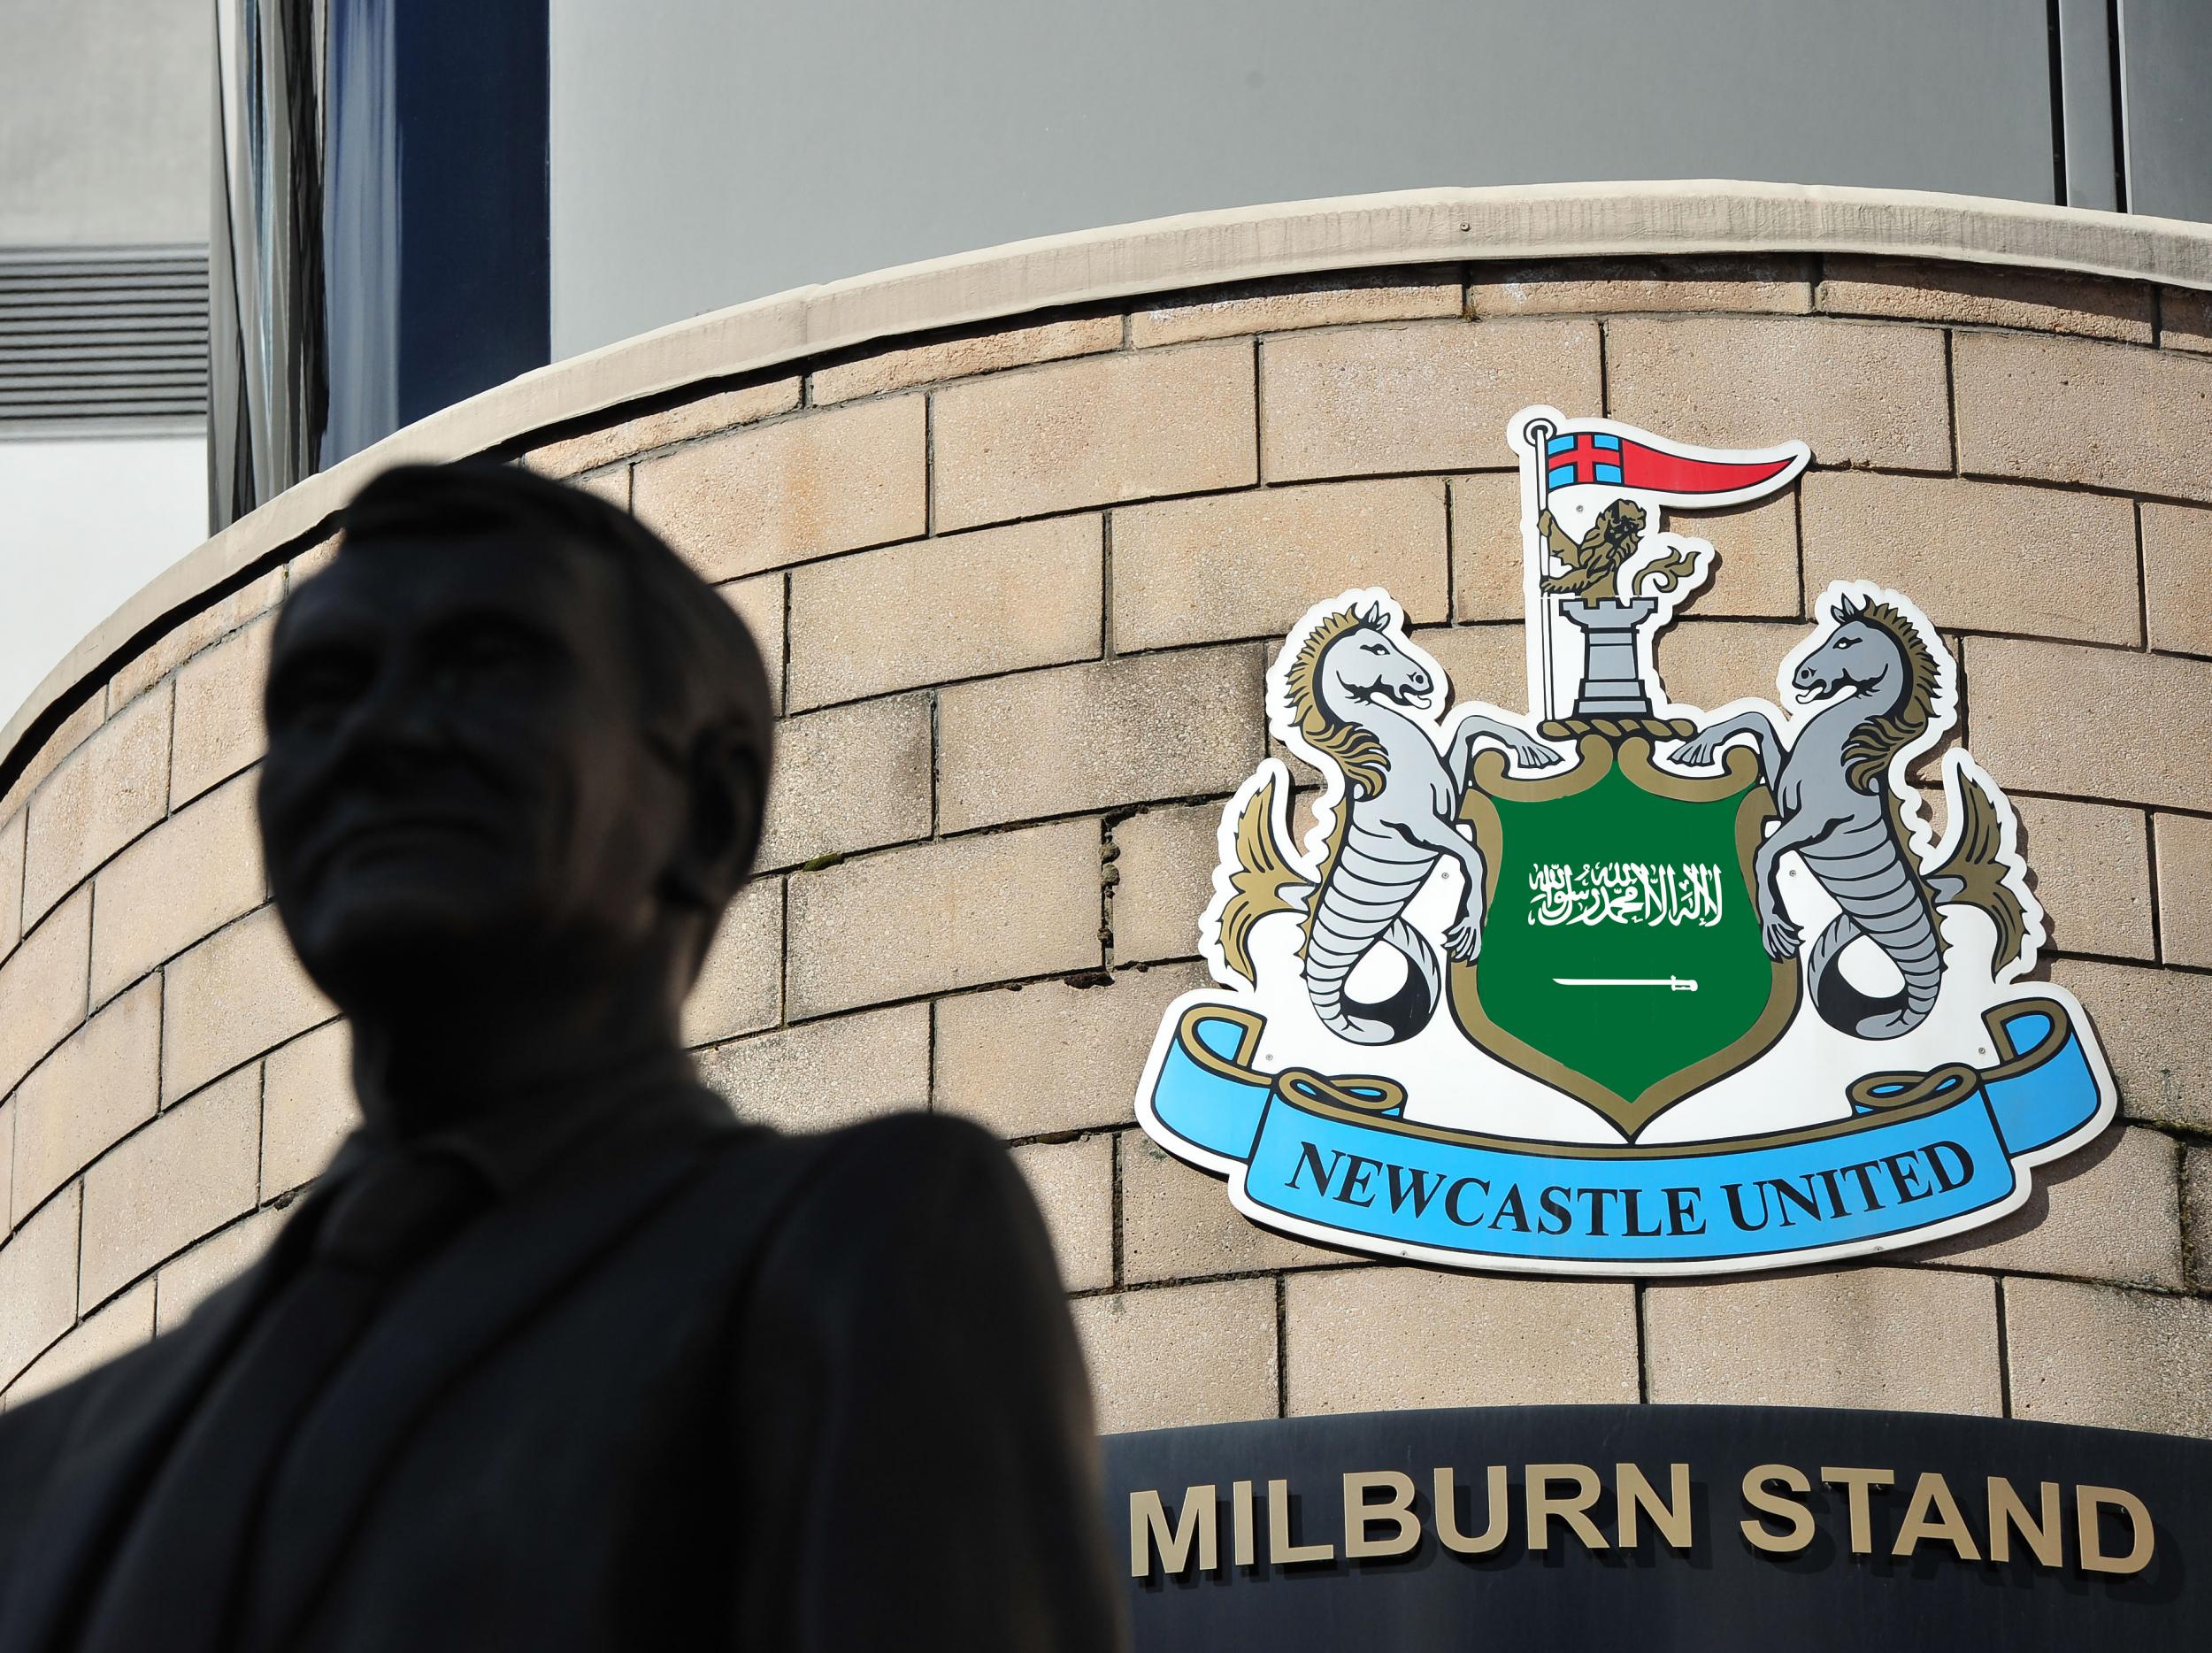 Saudi Arabia's sovereign wealth fund could fund a Newcastle United takeover